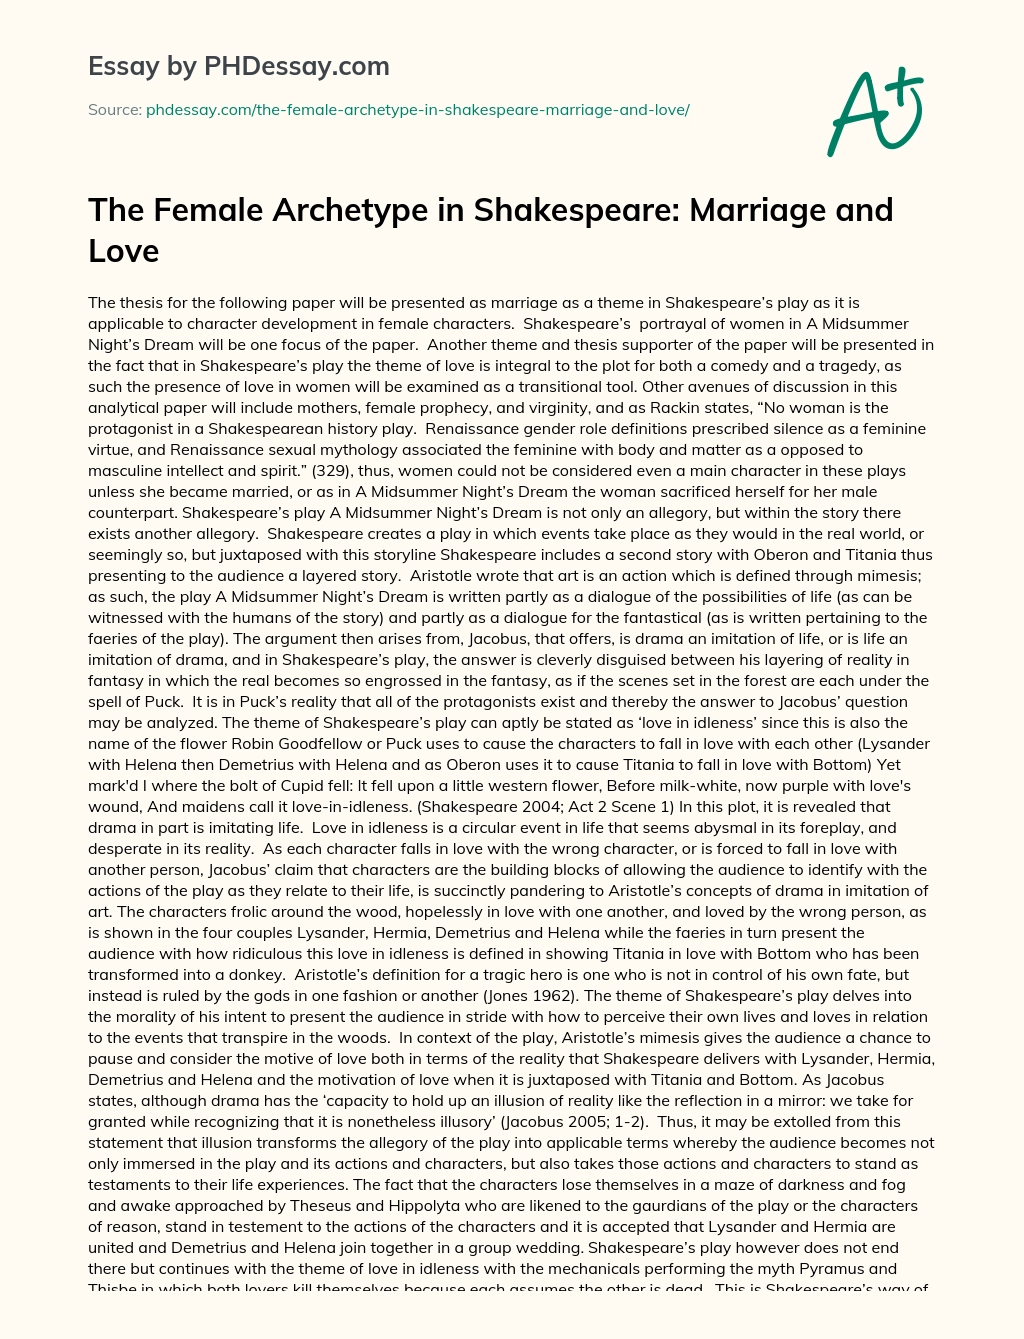 The Female Archetype in Shakespeare:  Marriage and Love essay